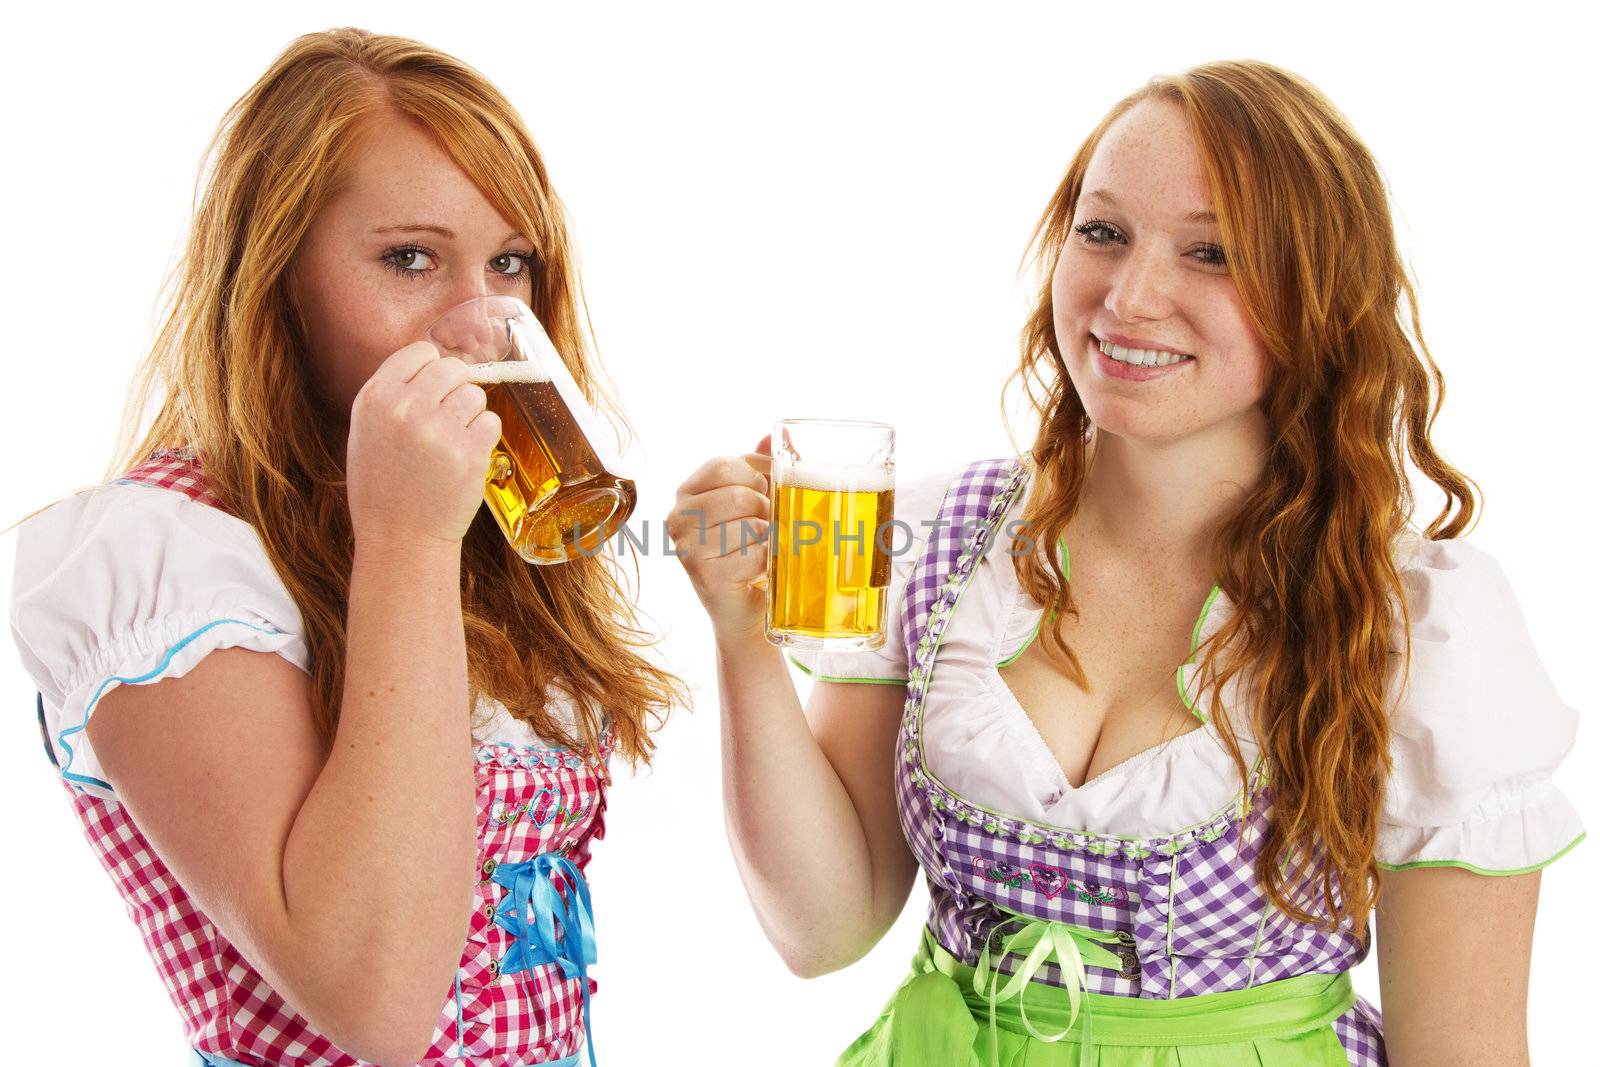 two bavarian girls laughing and drinking beer on white background